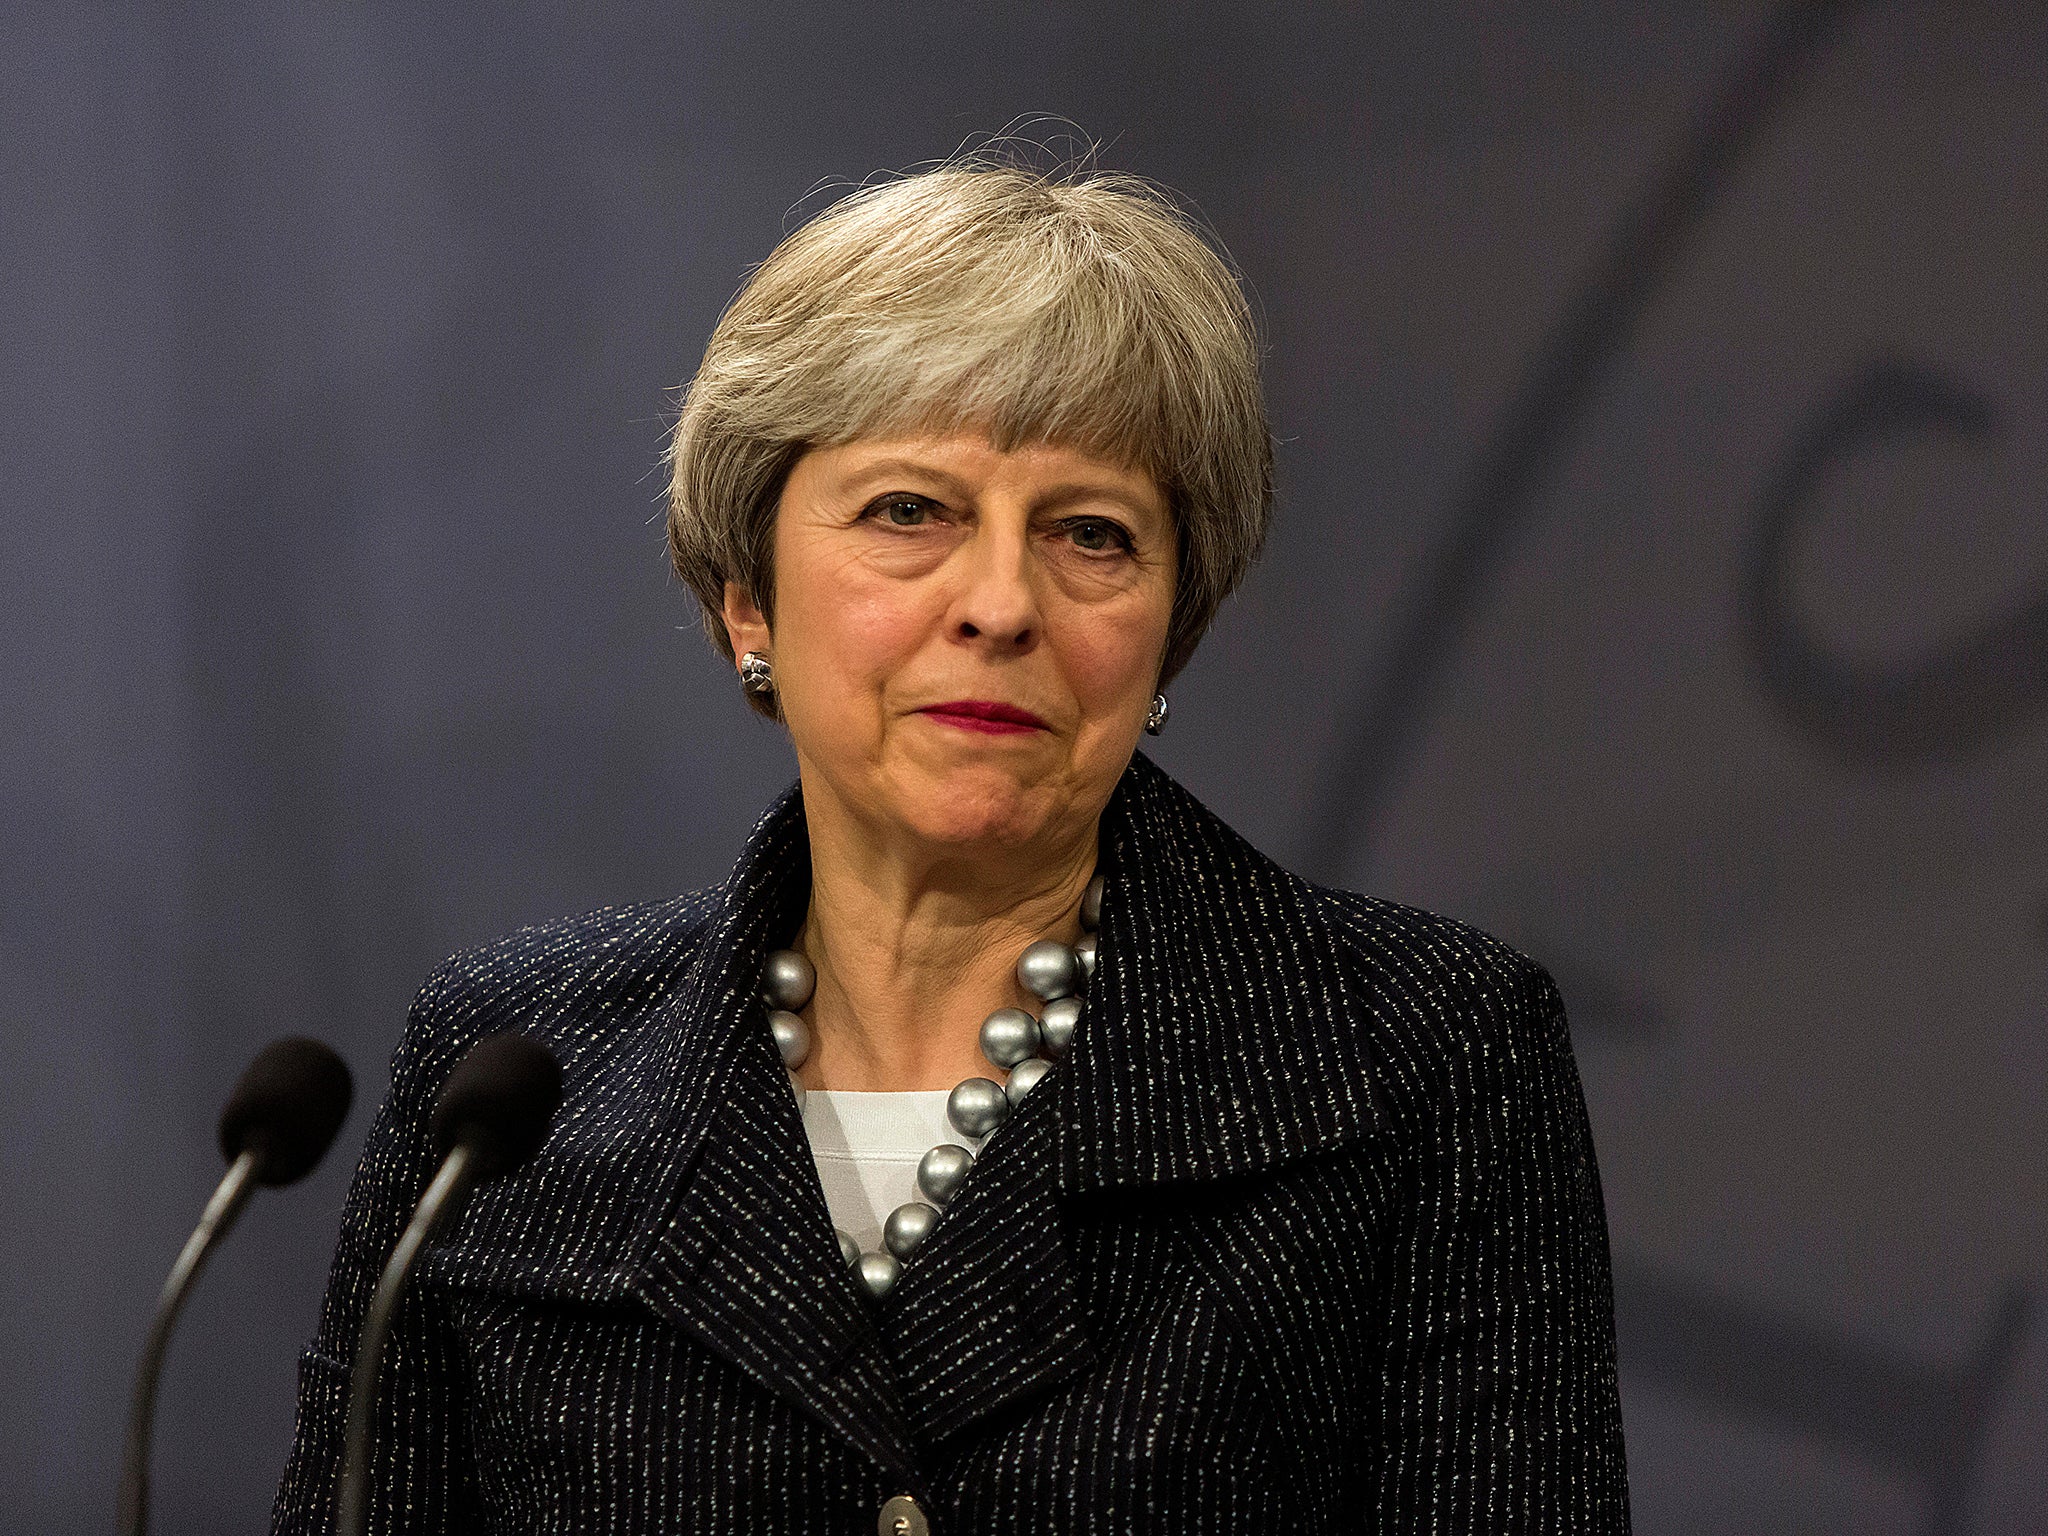 PM will summon her cabinet next week to her Chequers residence